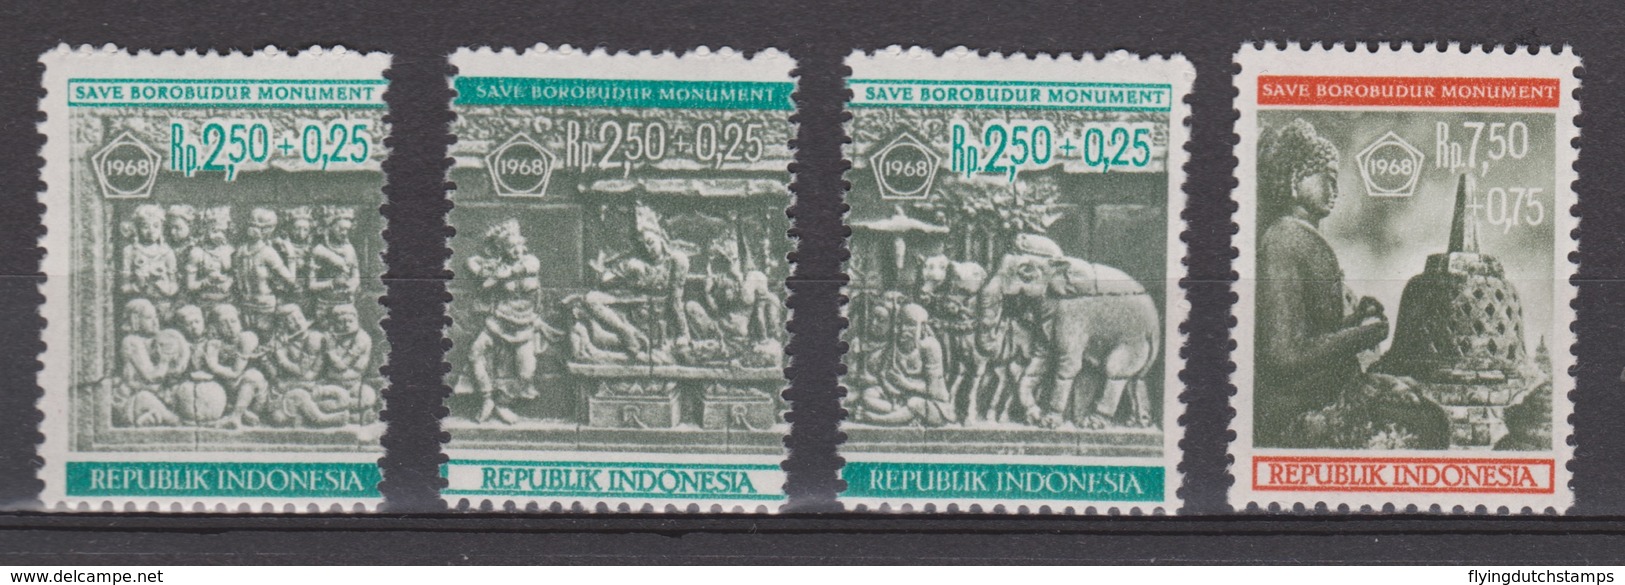 Indonesie 603-604 MNH ; BOROBUDUR 1968 ; NOW MANY STAMPS INDONESIA VERY CHEAP - Monumenten